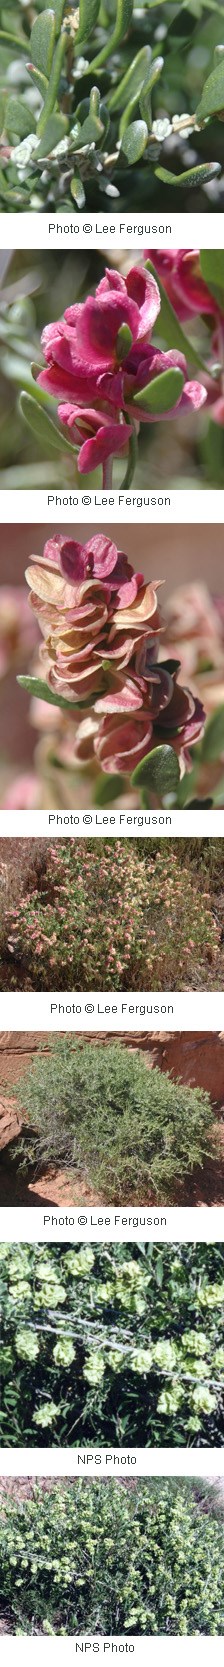 Several photos of clusters of flowers with pinkish-brown lobed petals.